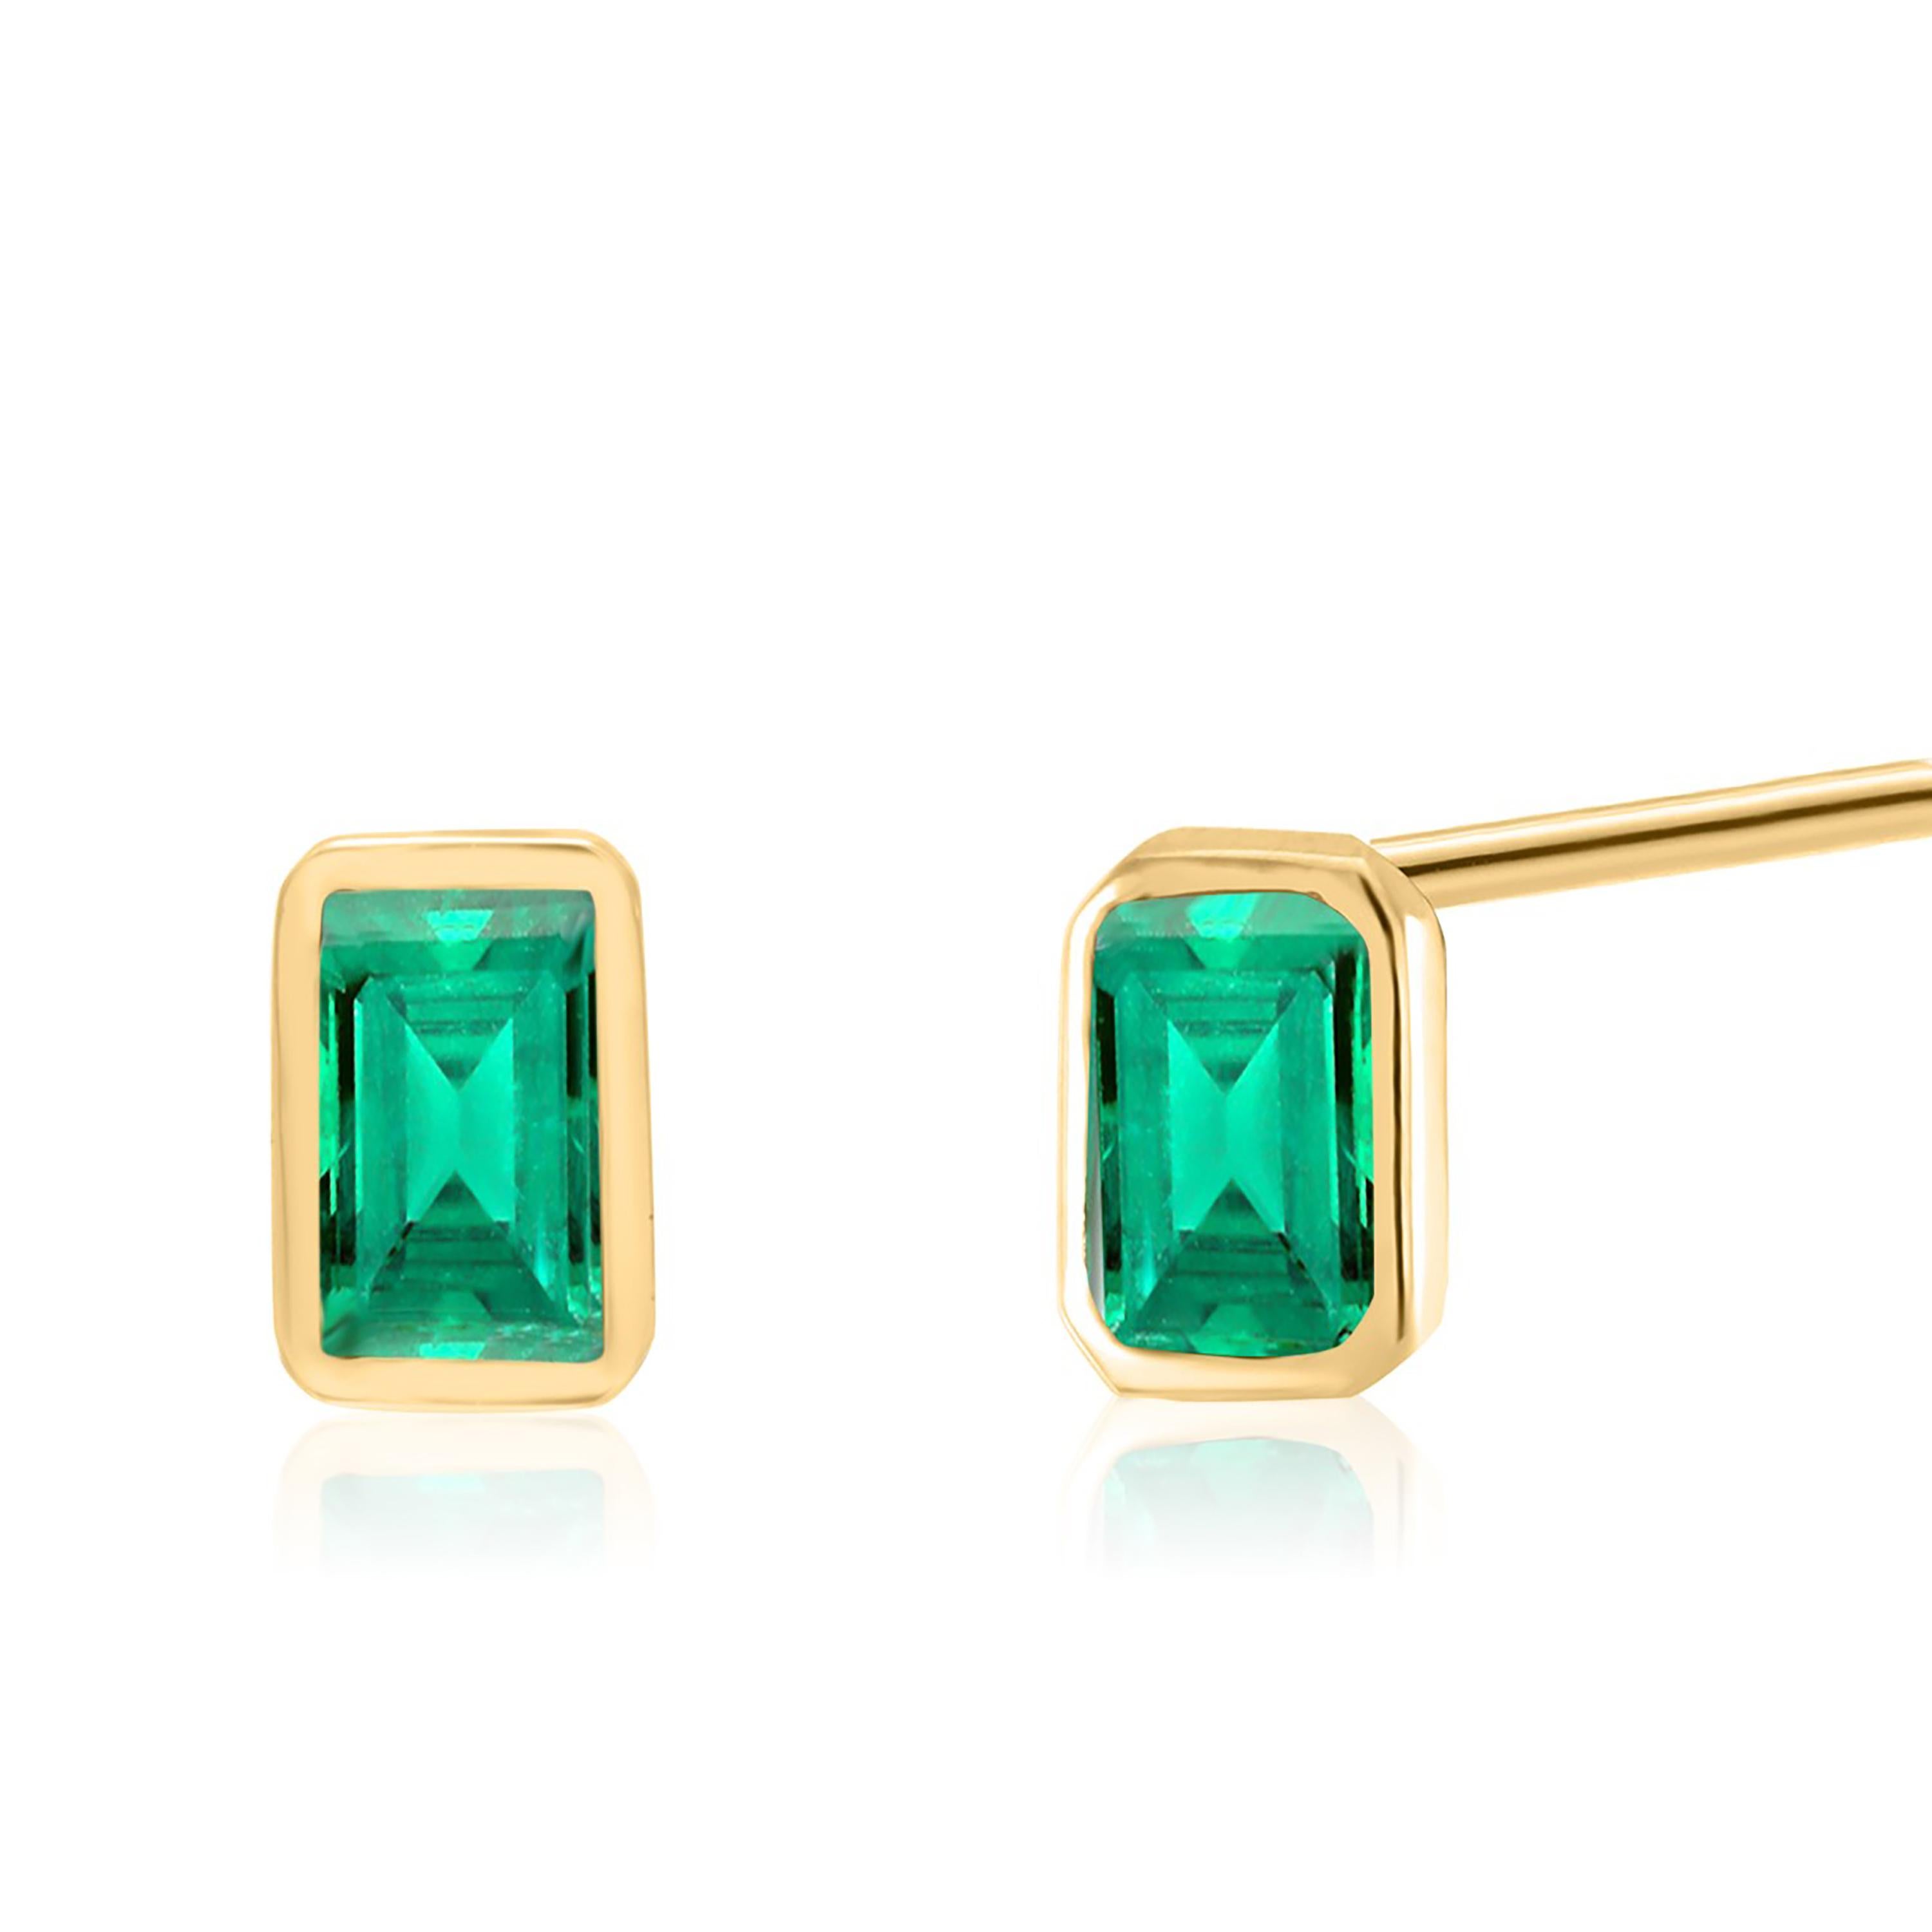 Emerald Shaped Colombia Emerald 0.65Carat Bezel Set Yellow Gold Stud Earrings In New Condition For Sale In New York, NY